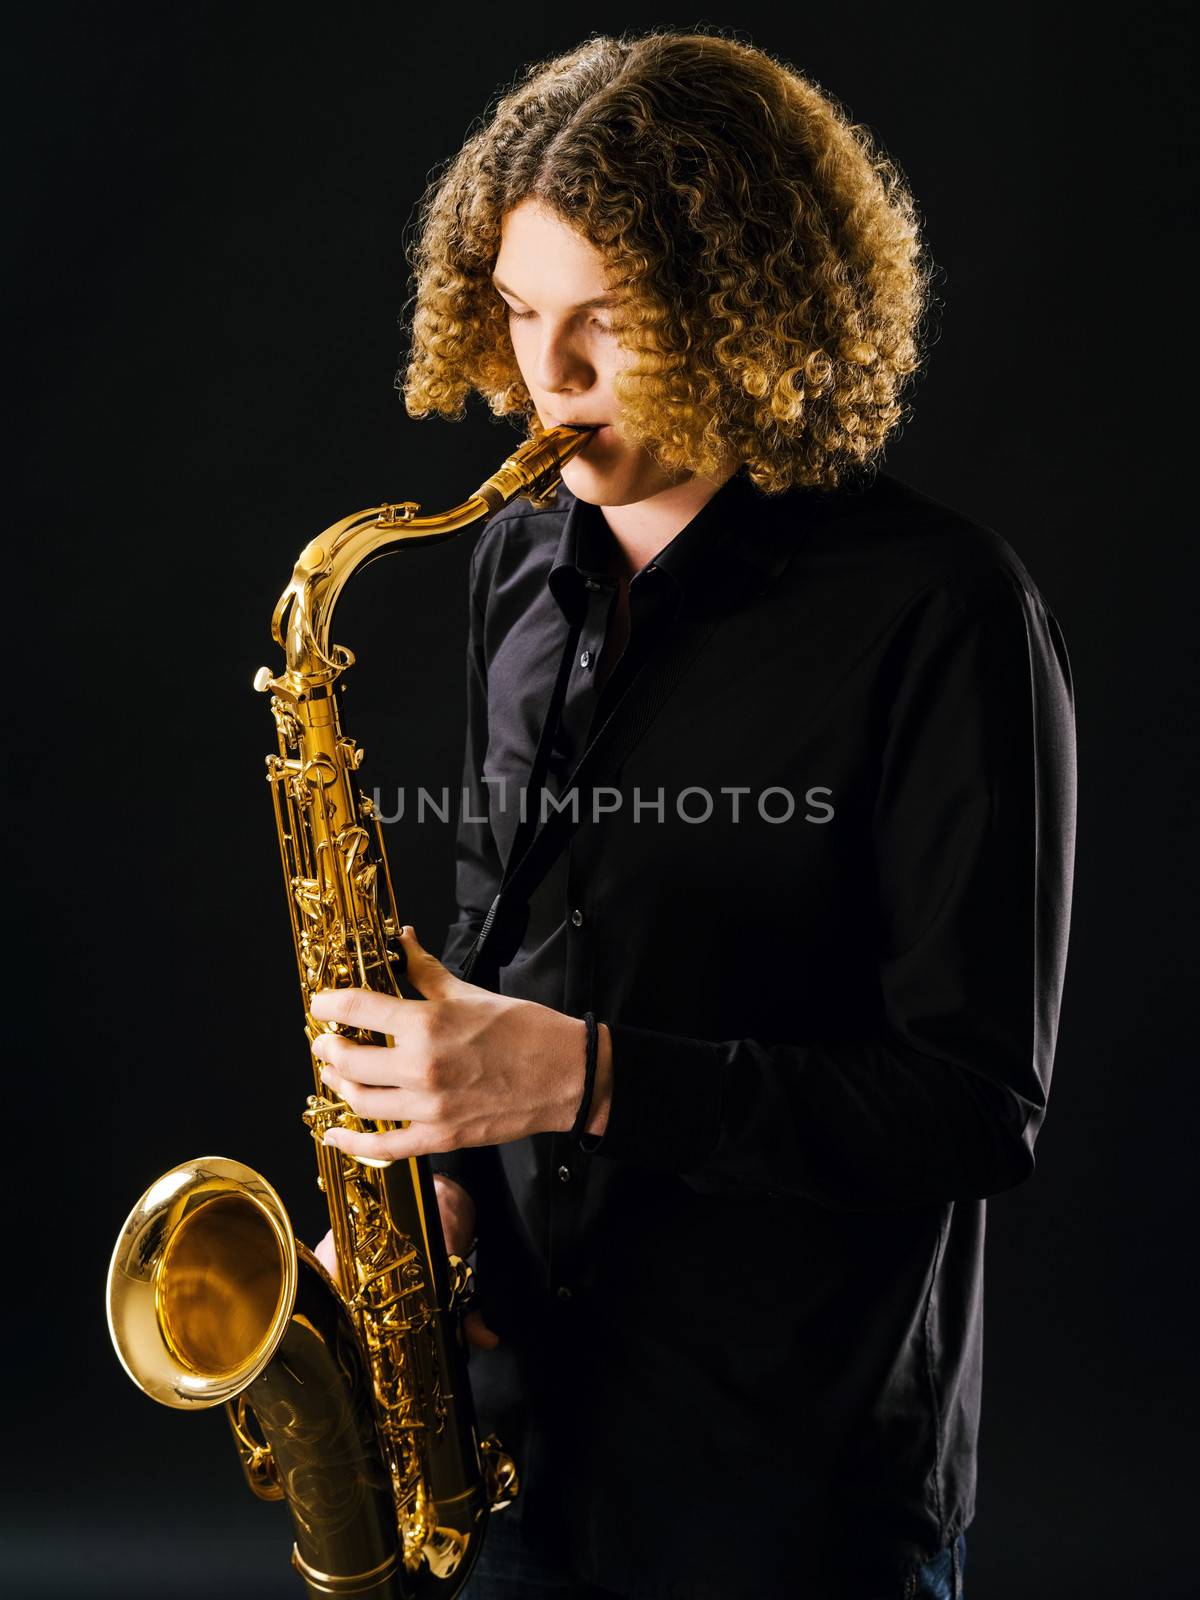 Teenager playing the saxophone by sumners